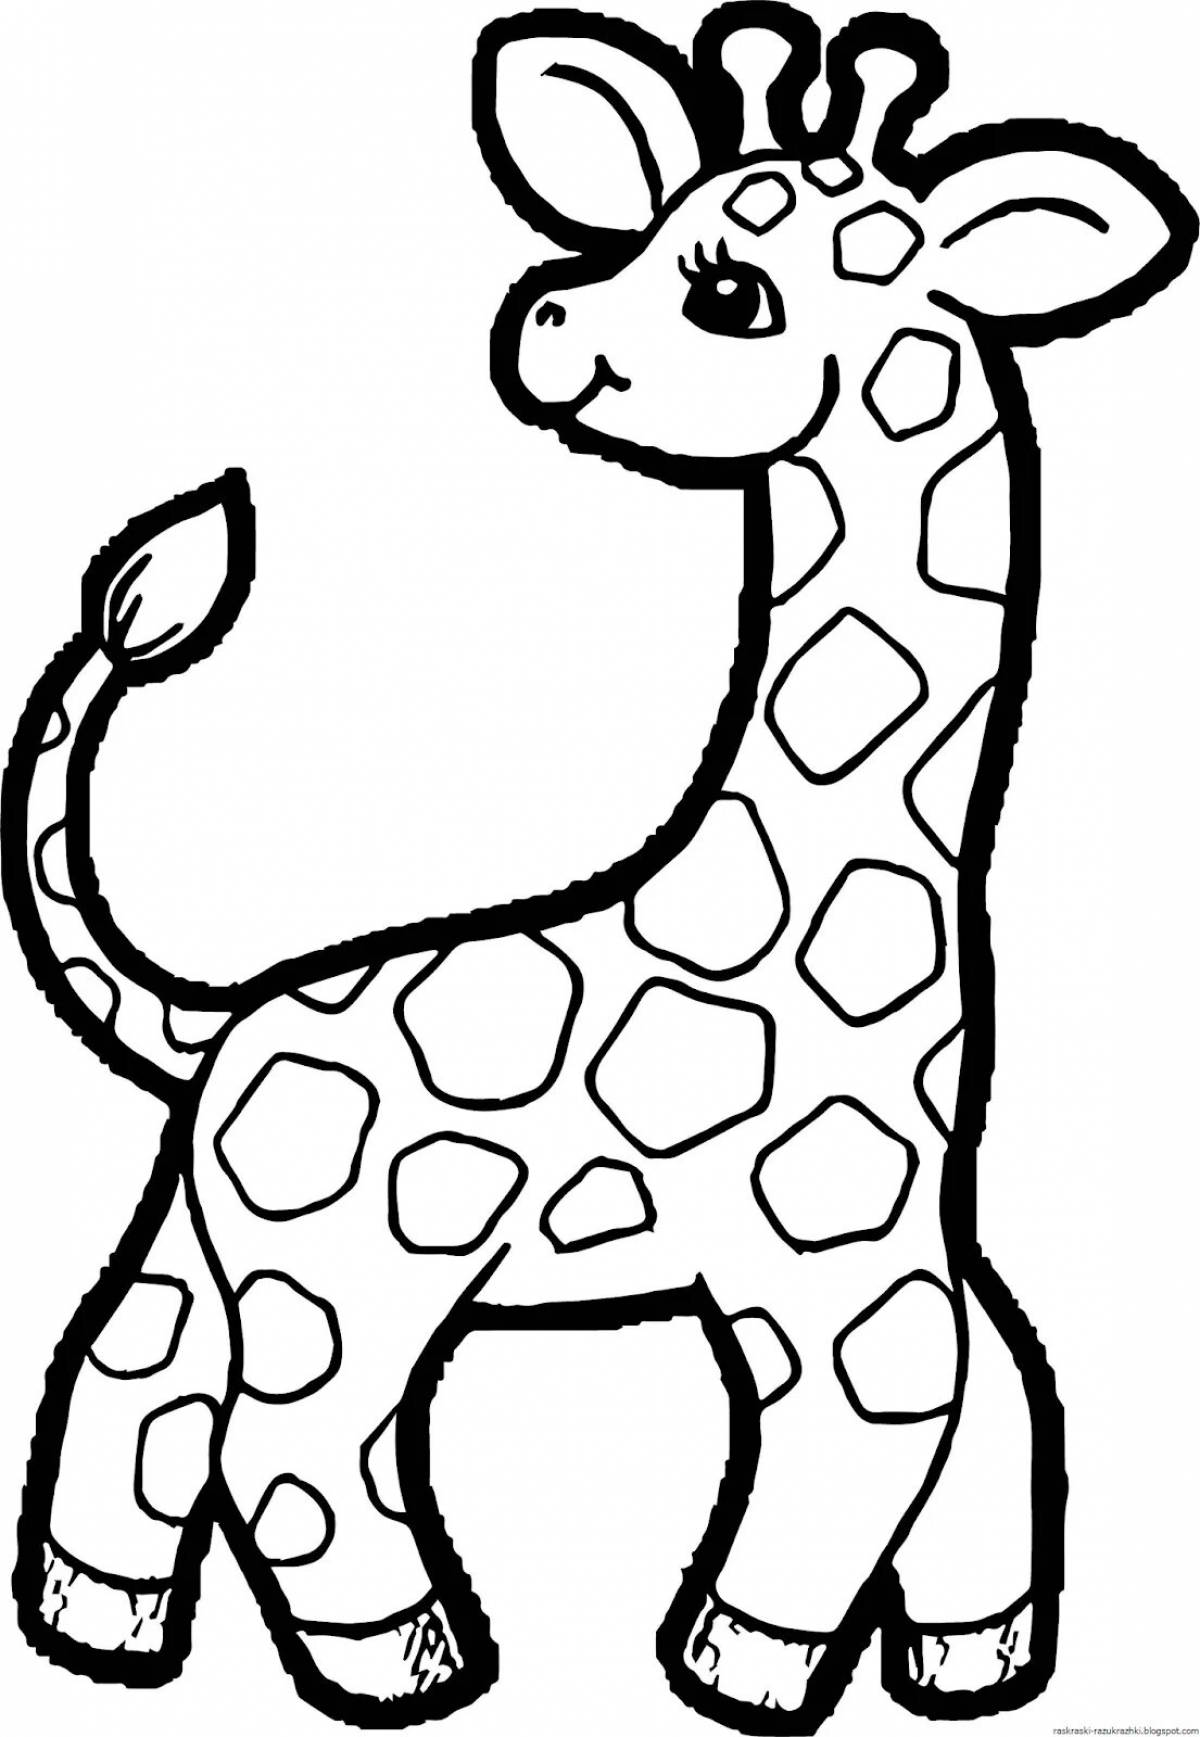 Animated giraffe coloring page for toddlers